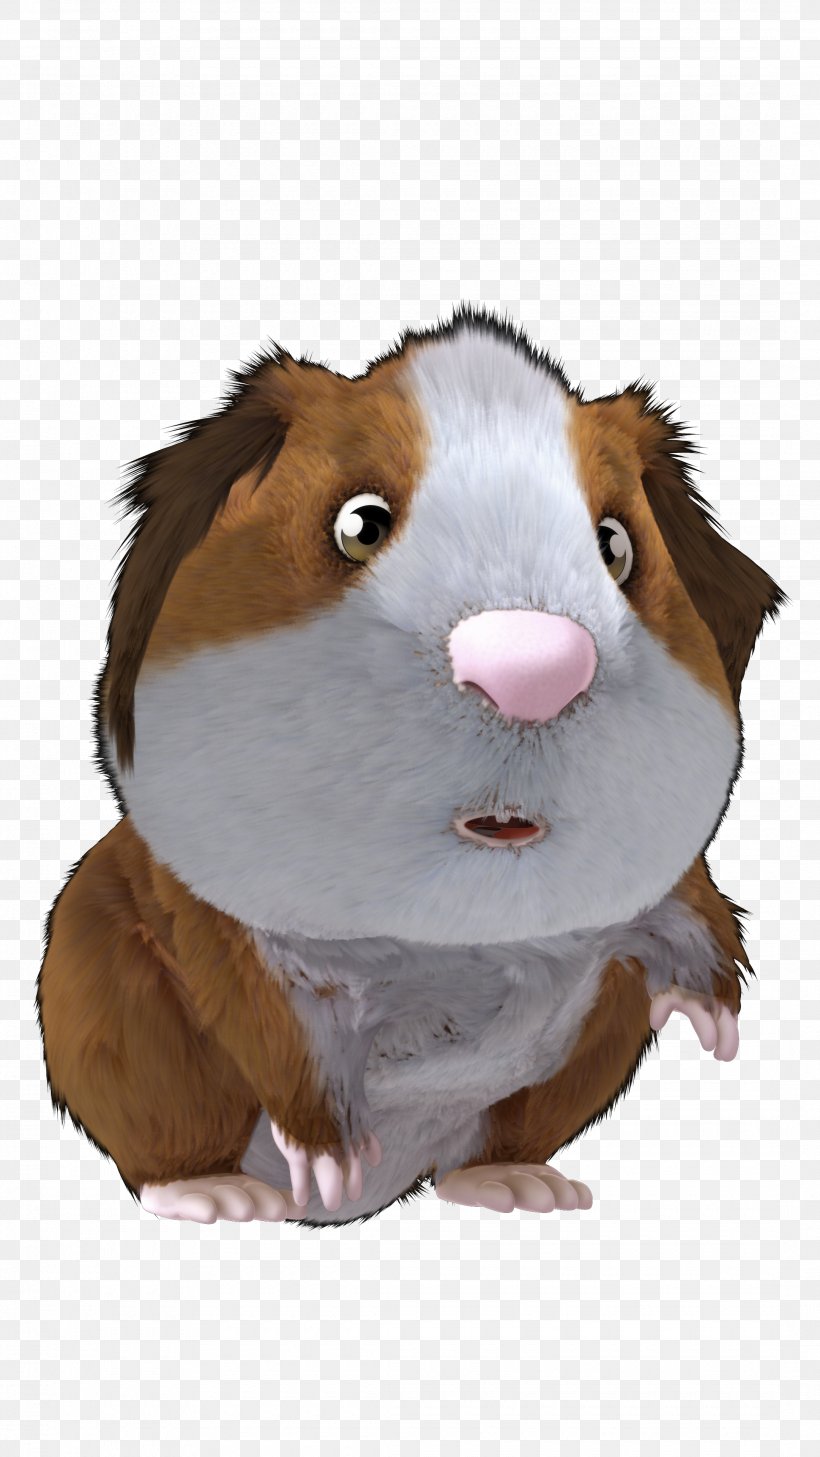 Guinea Pig Stuffed Animals & Cuddly Toys Snout, PNG, 2160x3840px, Guinea Pig, Fur, Guinea, Pig, Plush Download Free